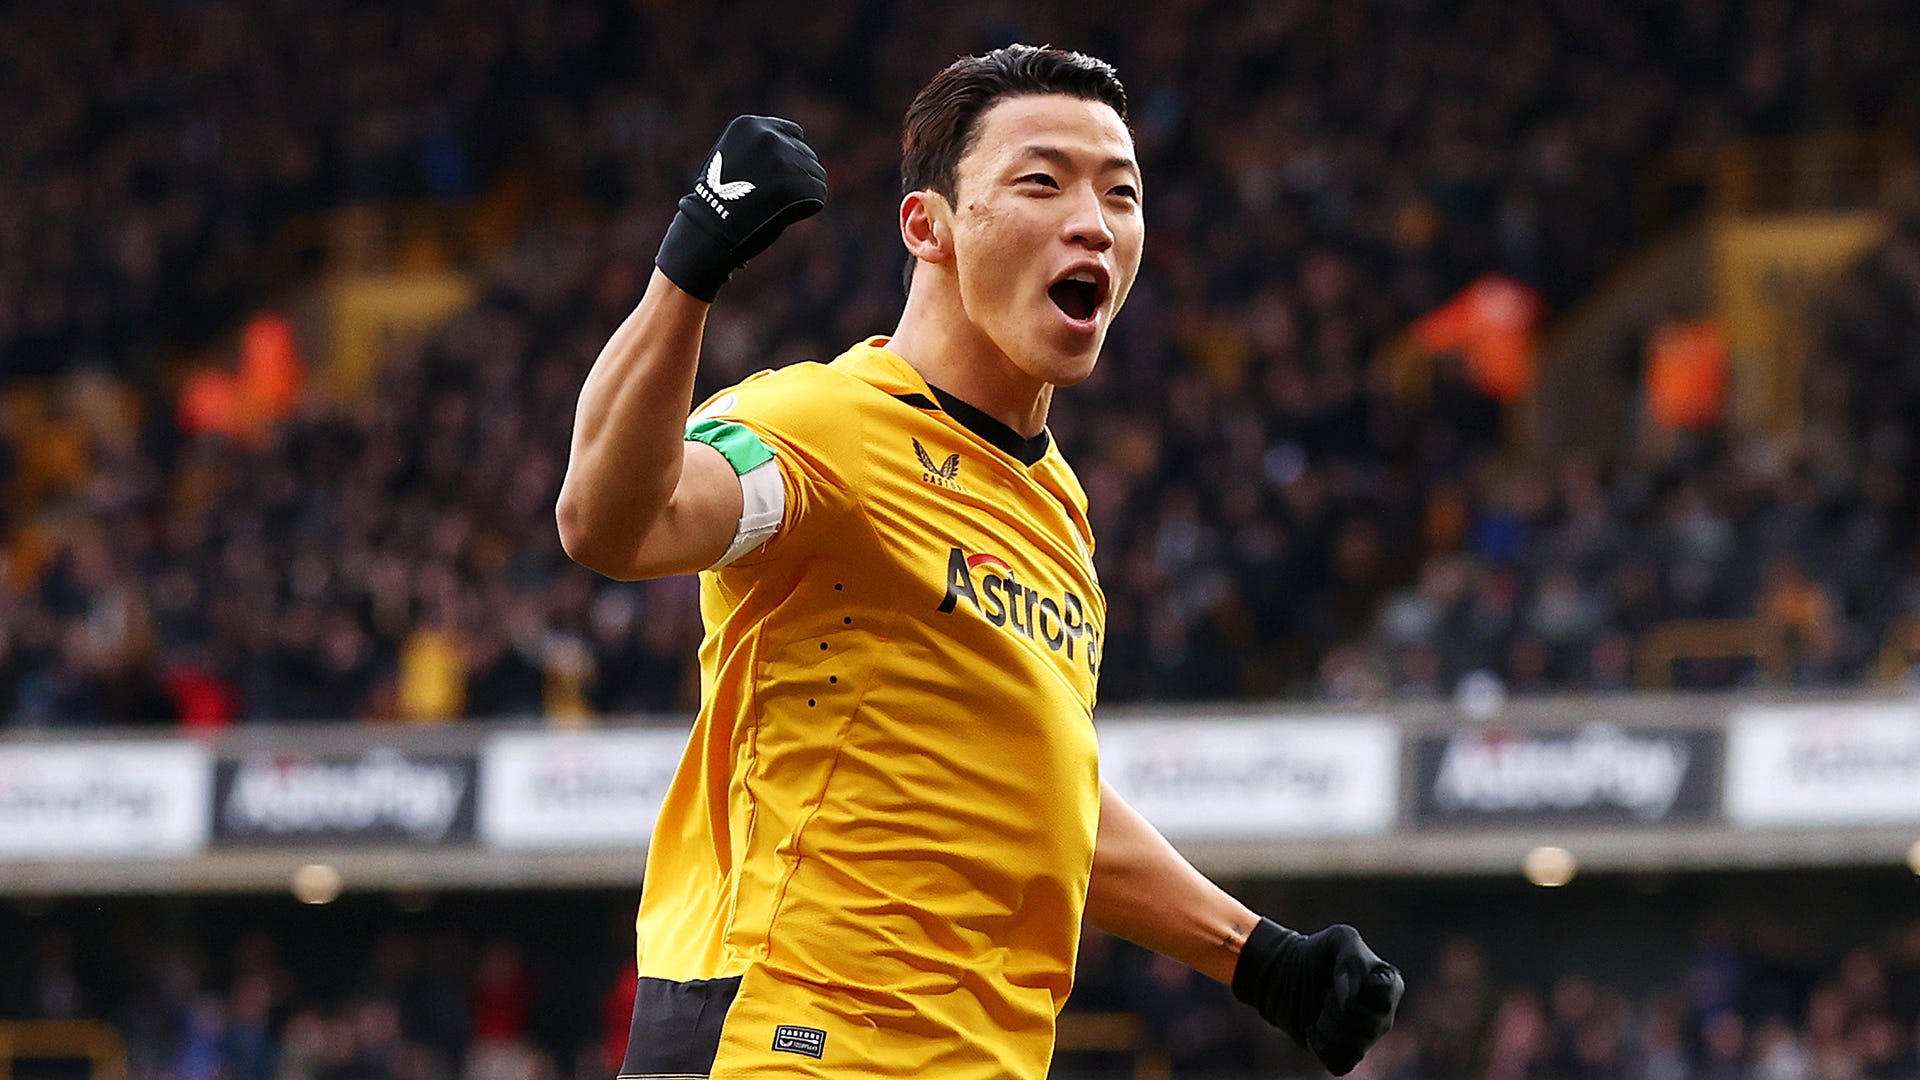 Wolves admin brutally trolls Man City boss Pep Guardiola for forgetting Hwang Hee-chans name as they post hilarious Twitter update after shock winning goal Goal English Saudi Arabia